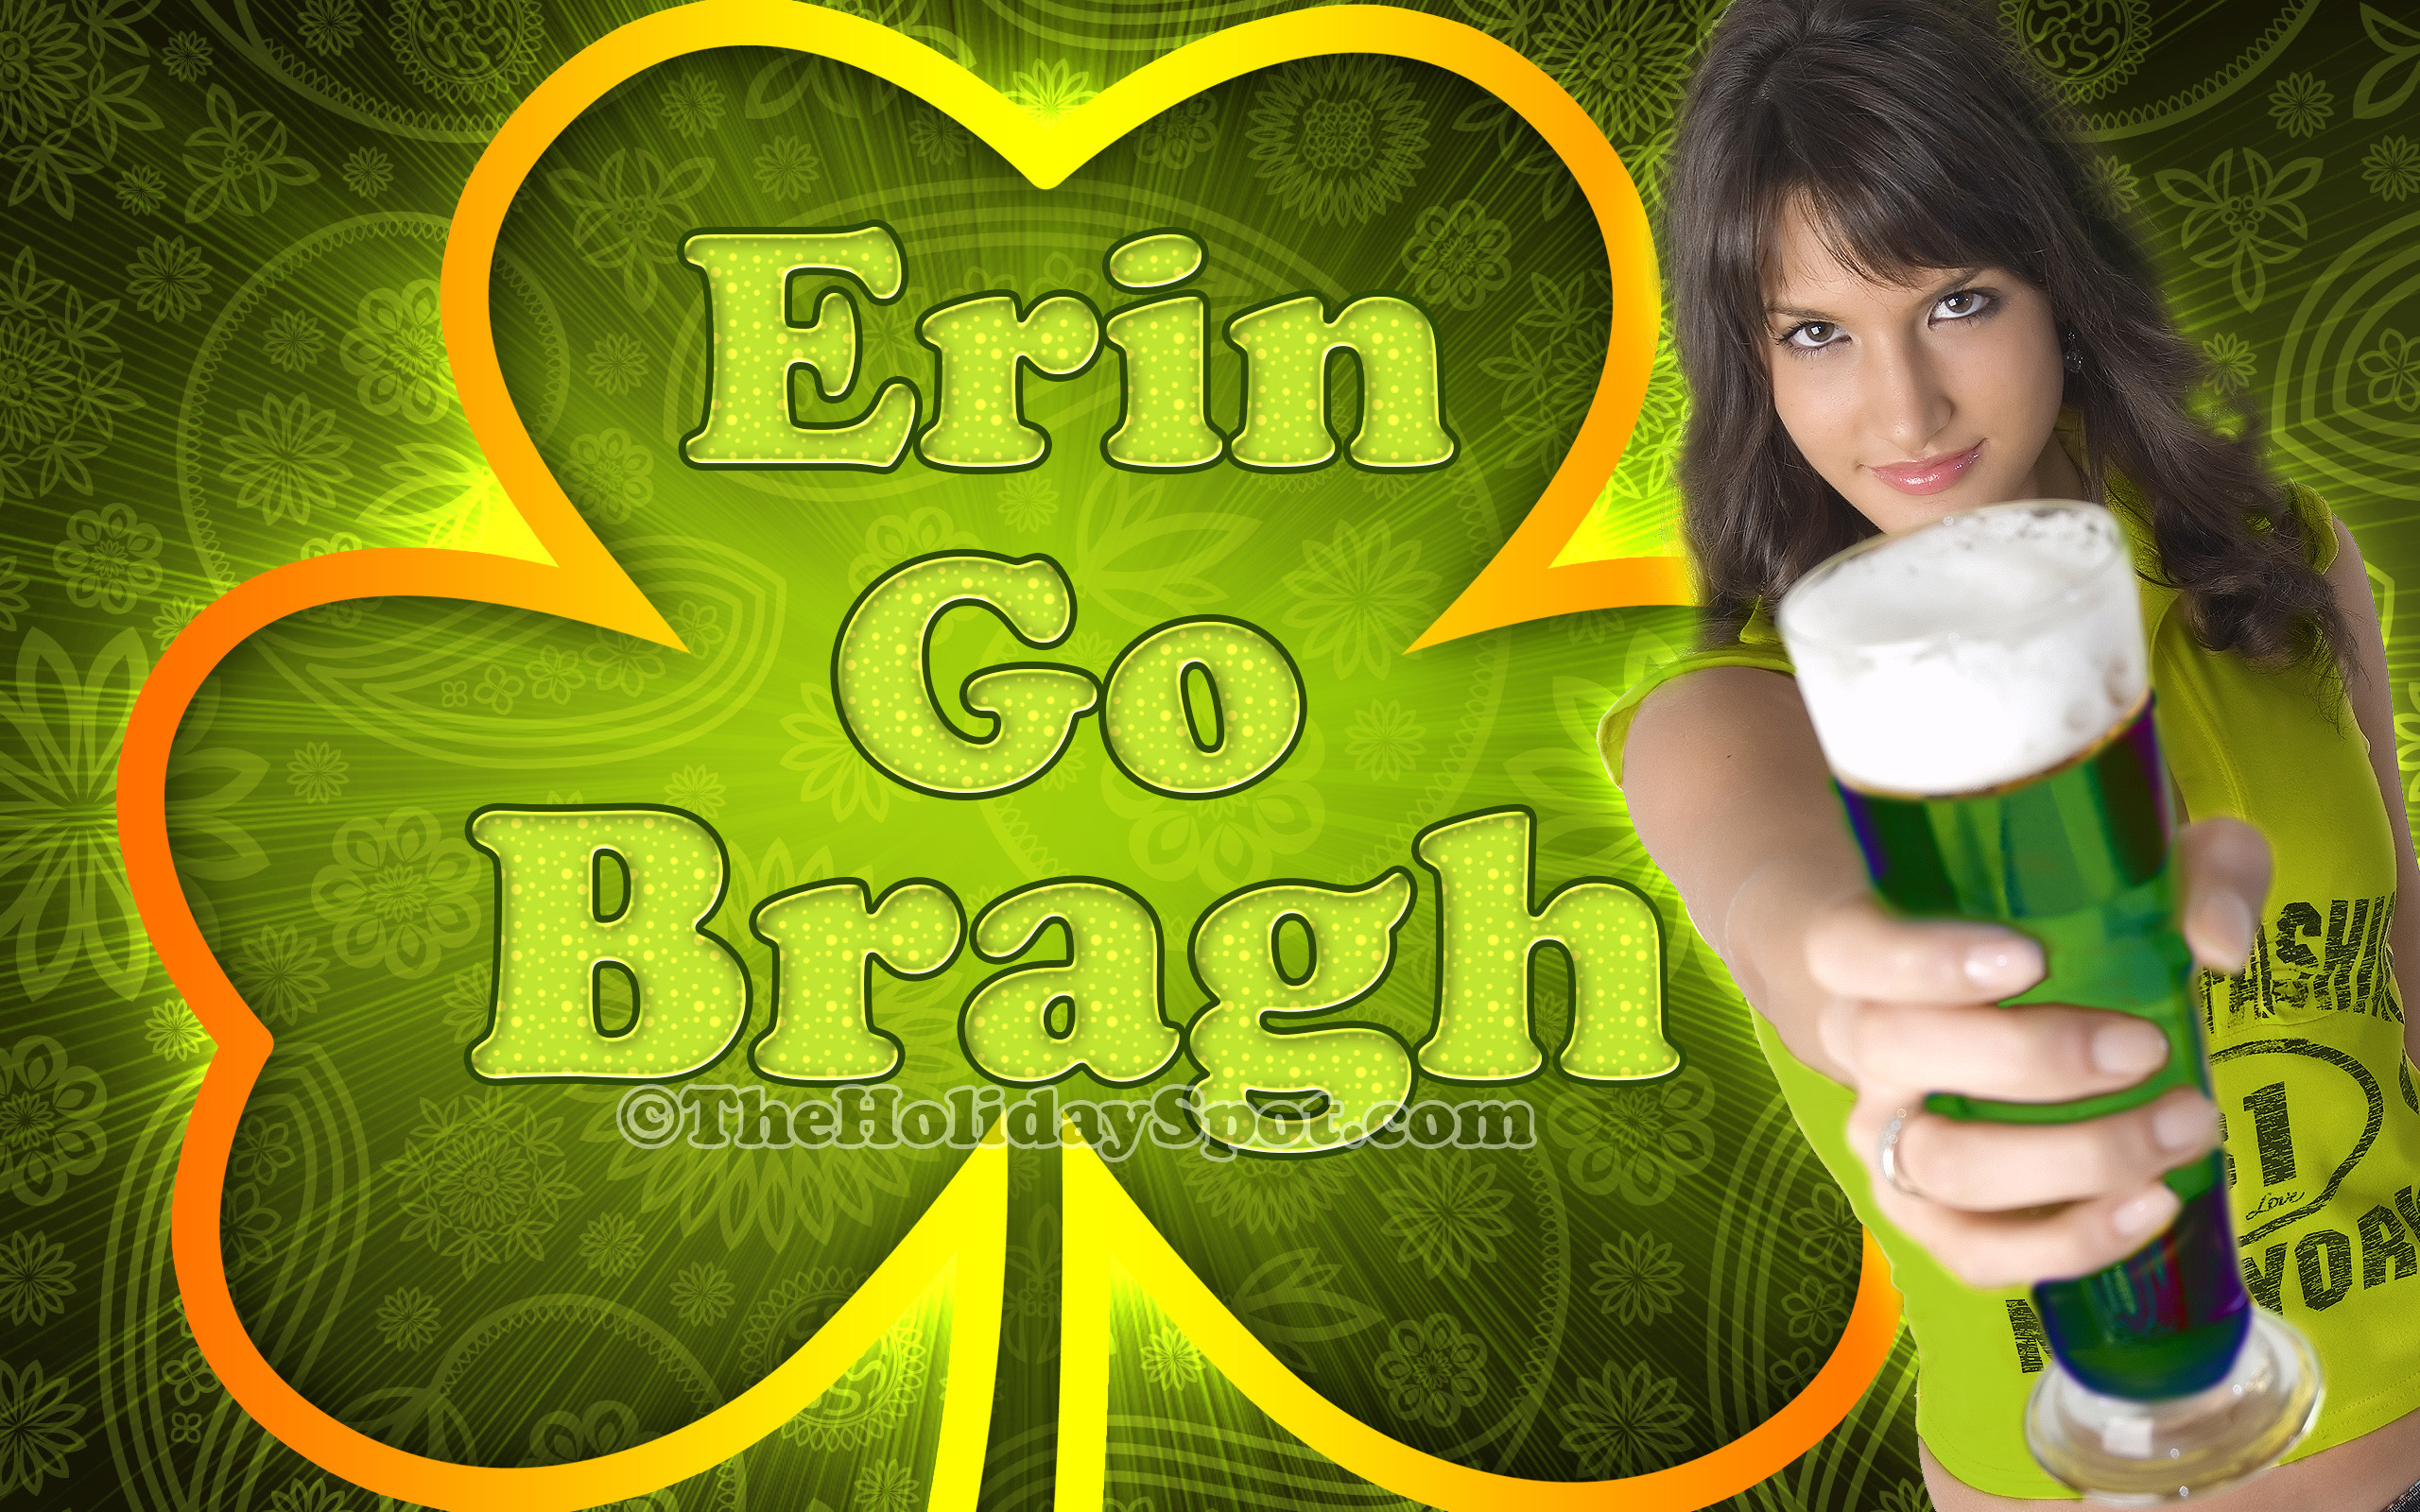 2560x1600 A high quality wallpaper of a beautiful lady offering beer on St. Patrick's  Day